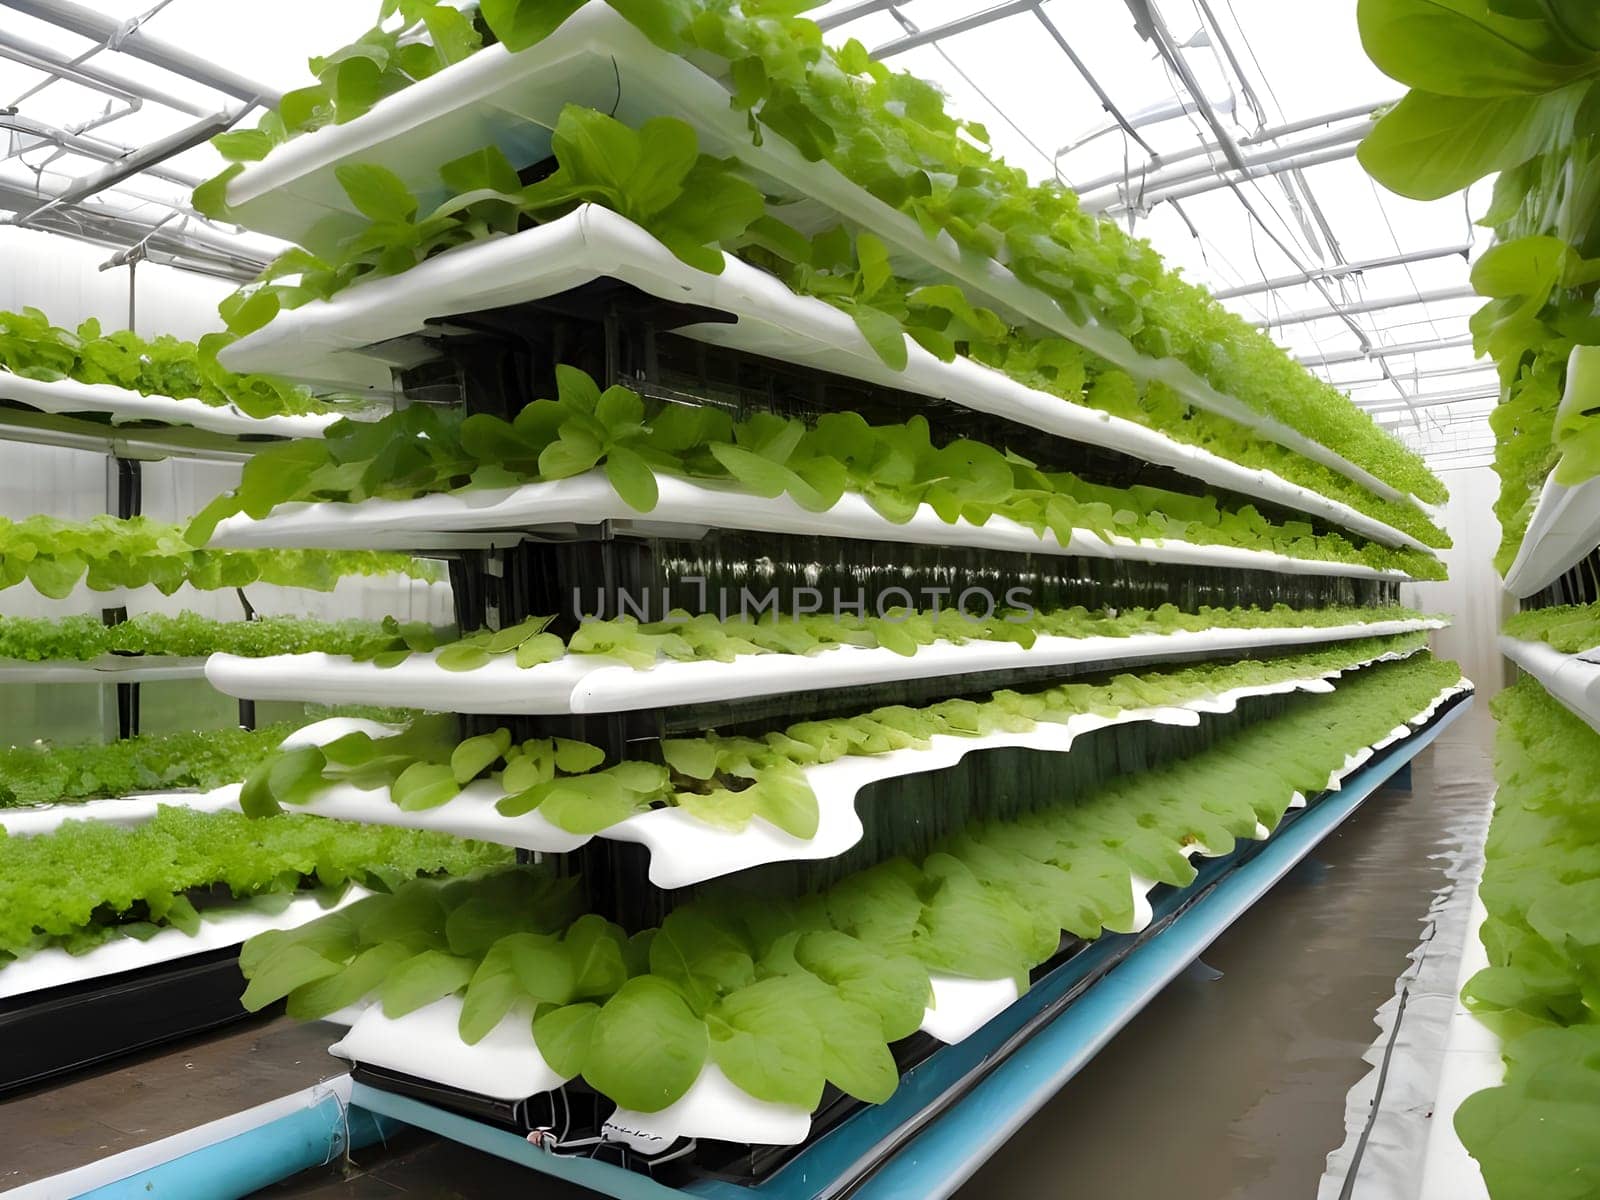 Sky-High Harvests. Exploring Vertical Farming and Hydroponic Innovations.